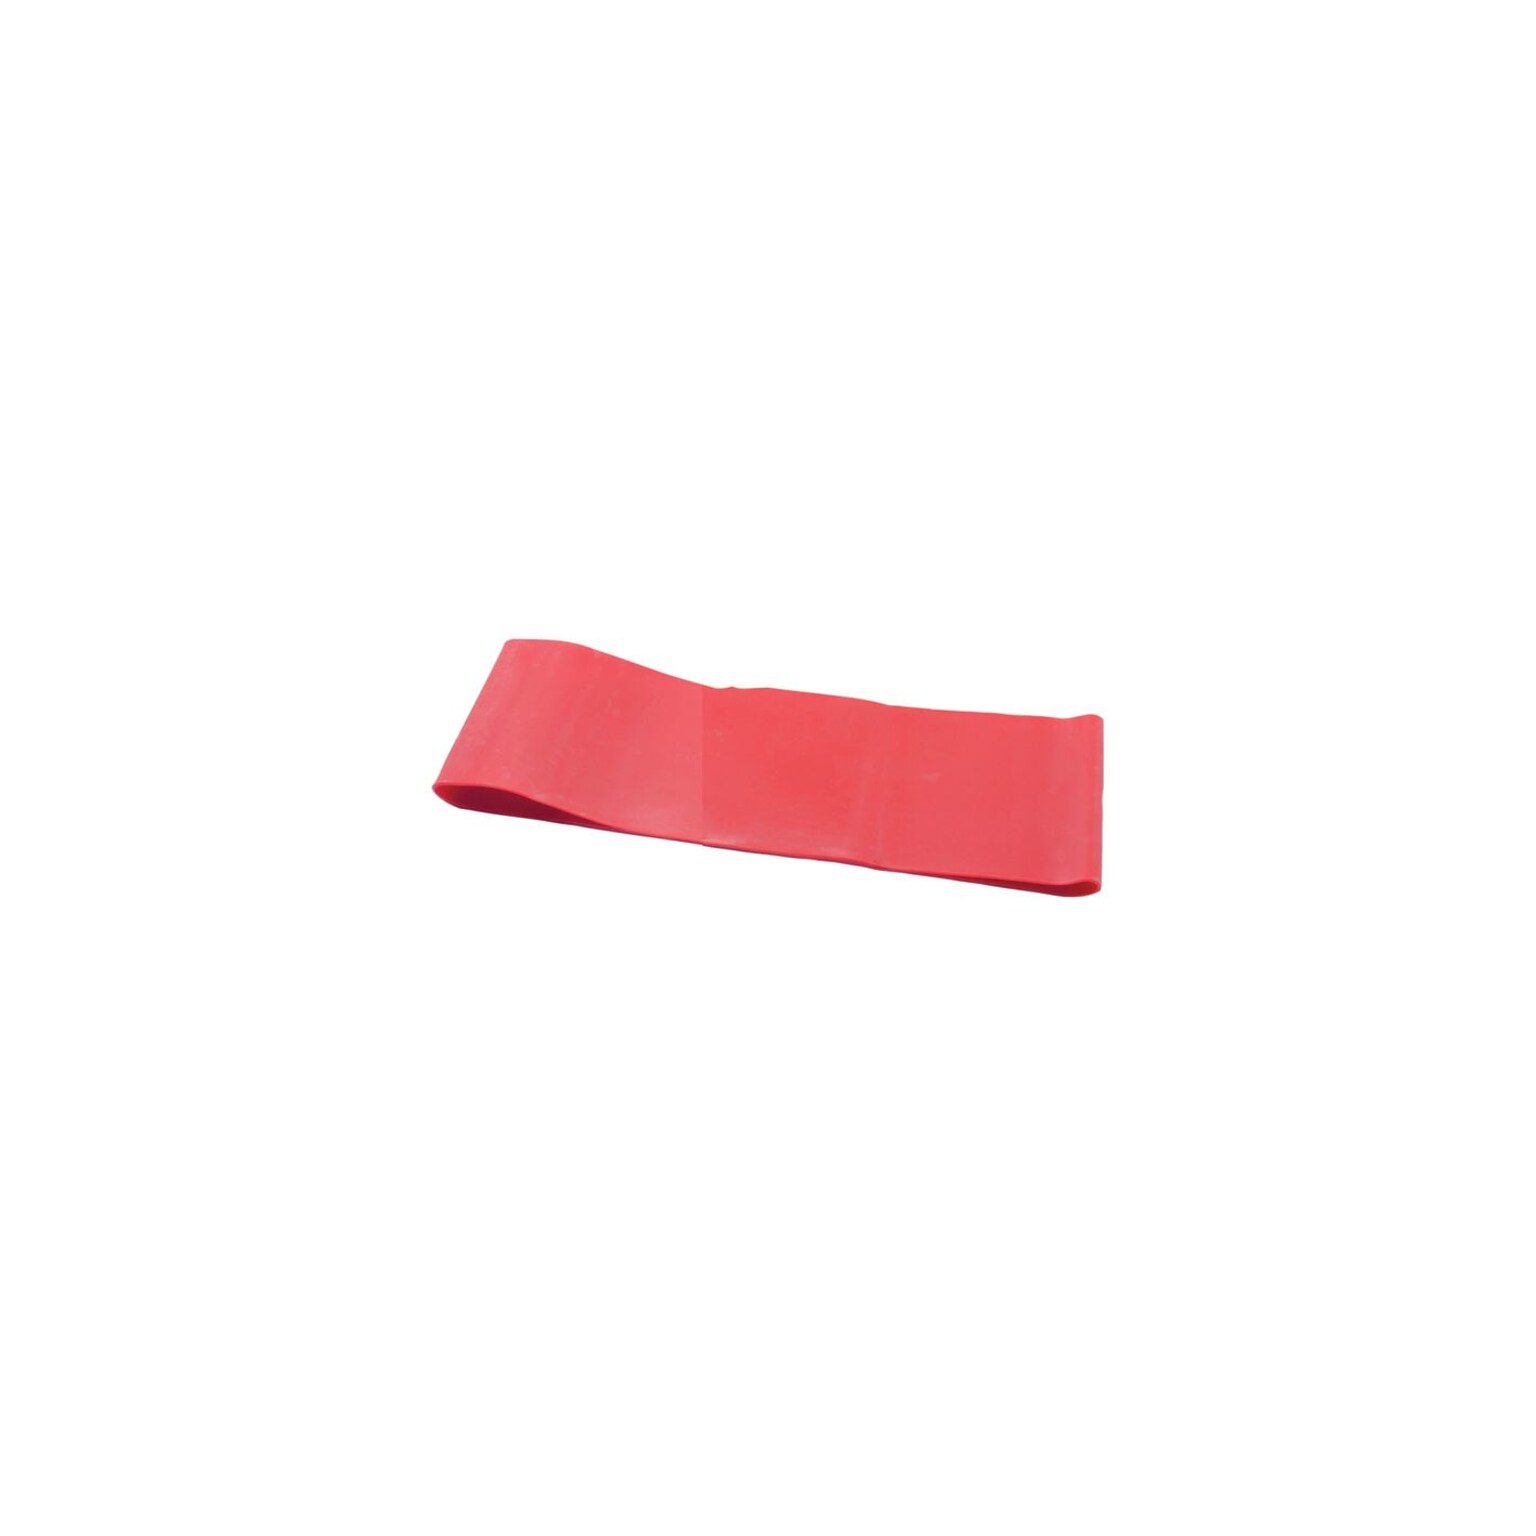 CanDo® Band Exercise Loop; 10 Long, Red, light